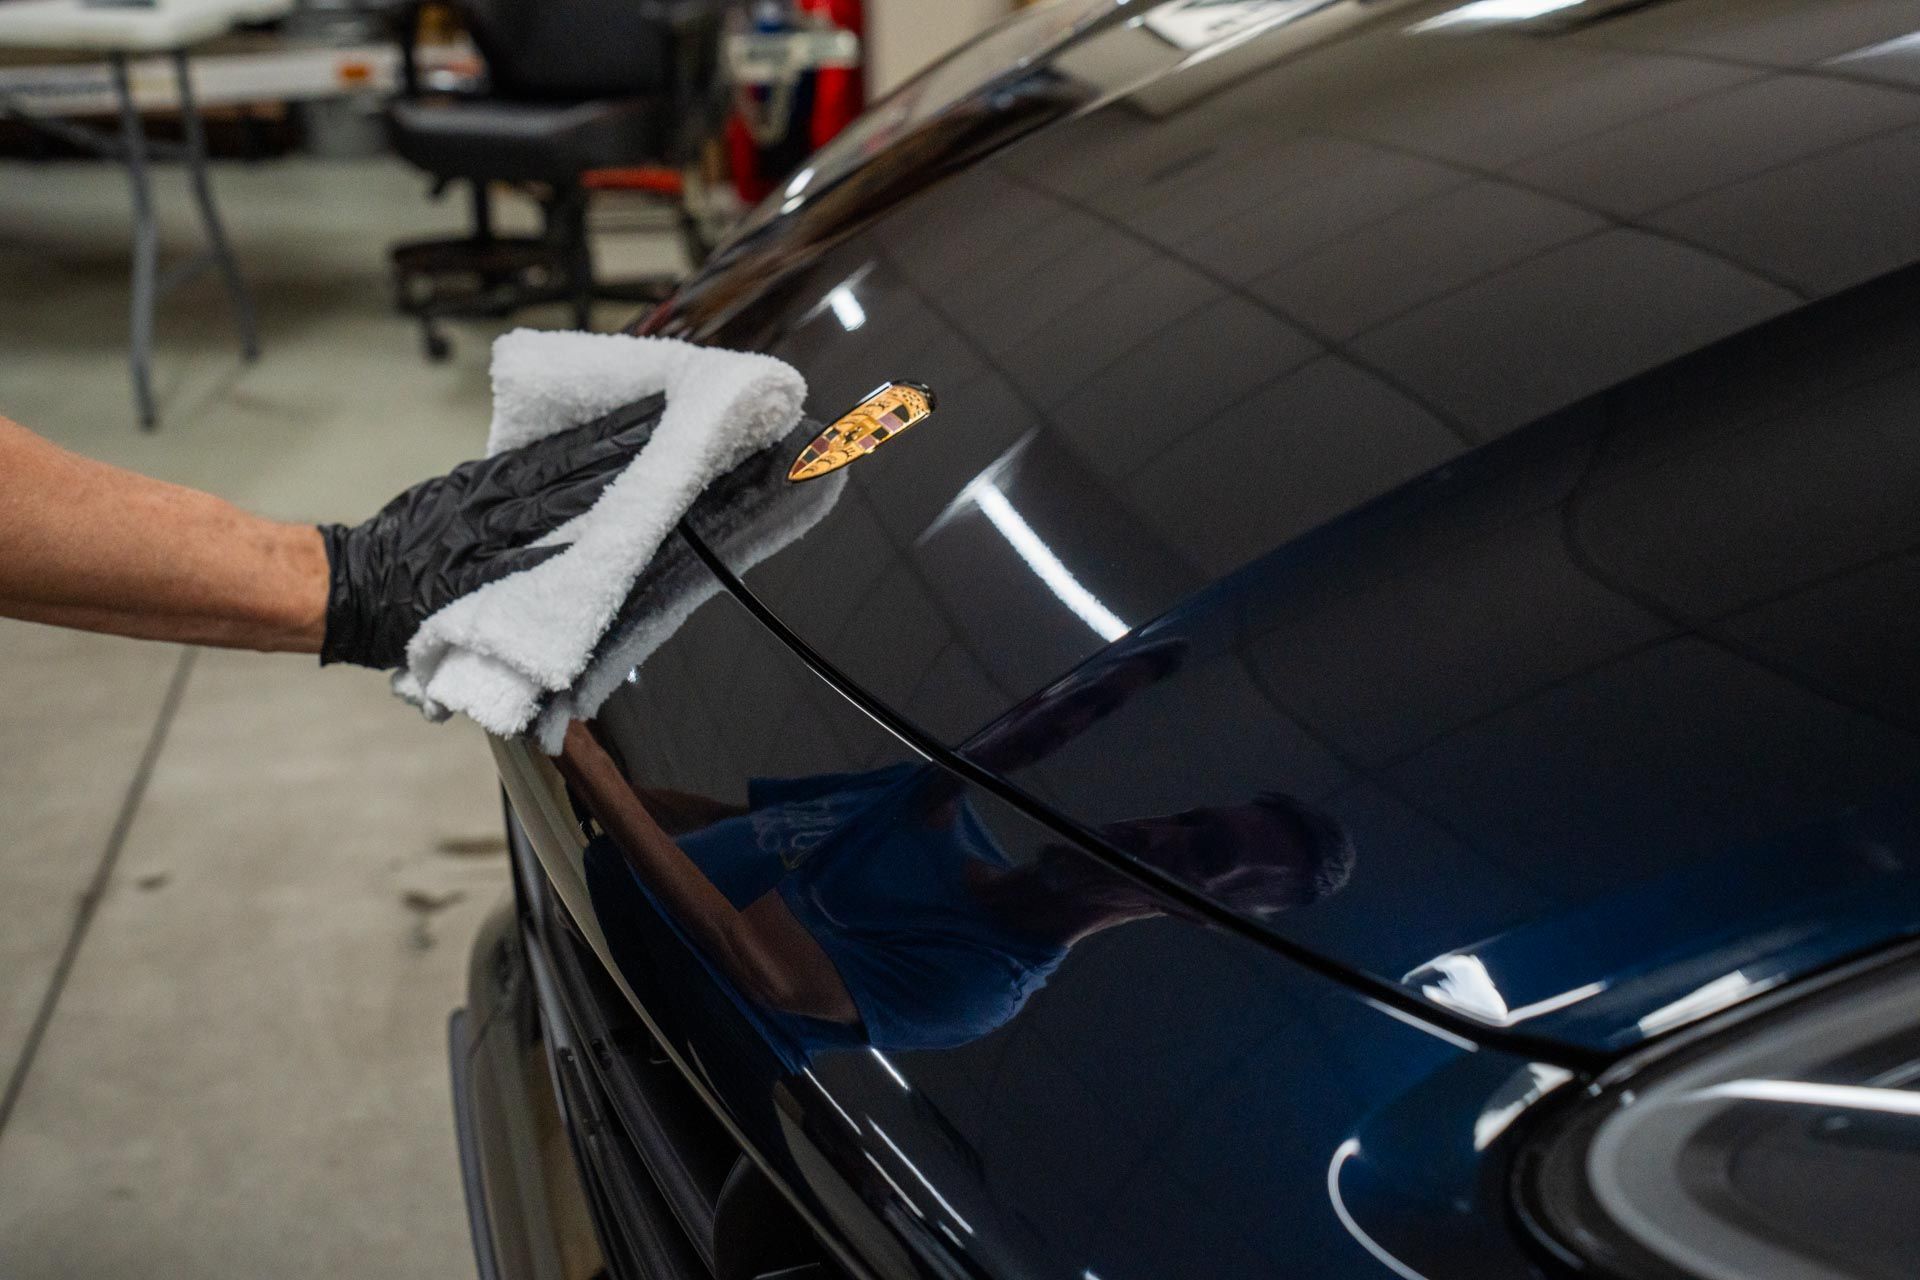 A person is cleaning the hood of a car with a towel.